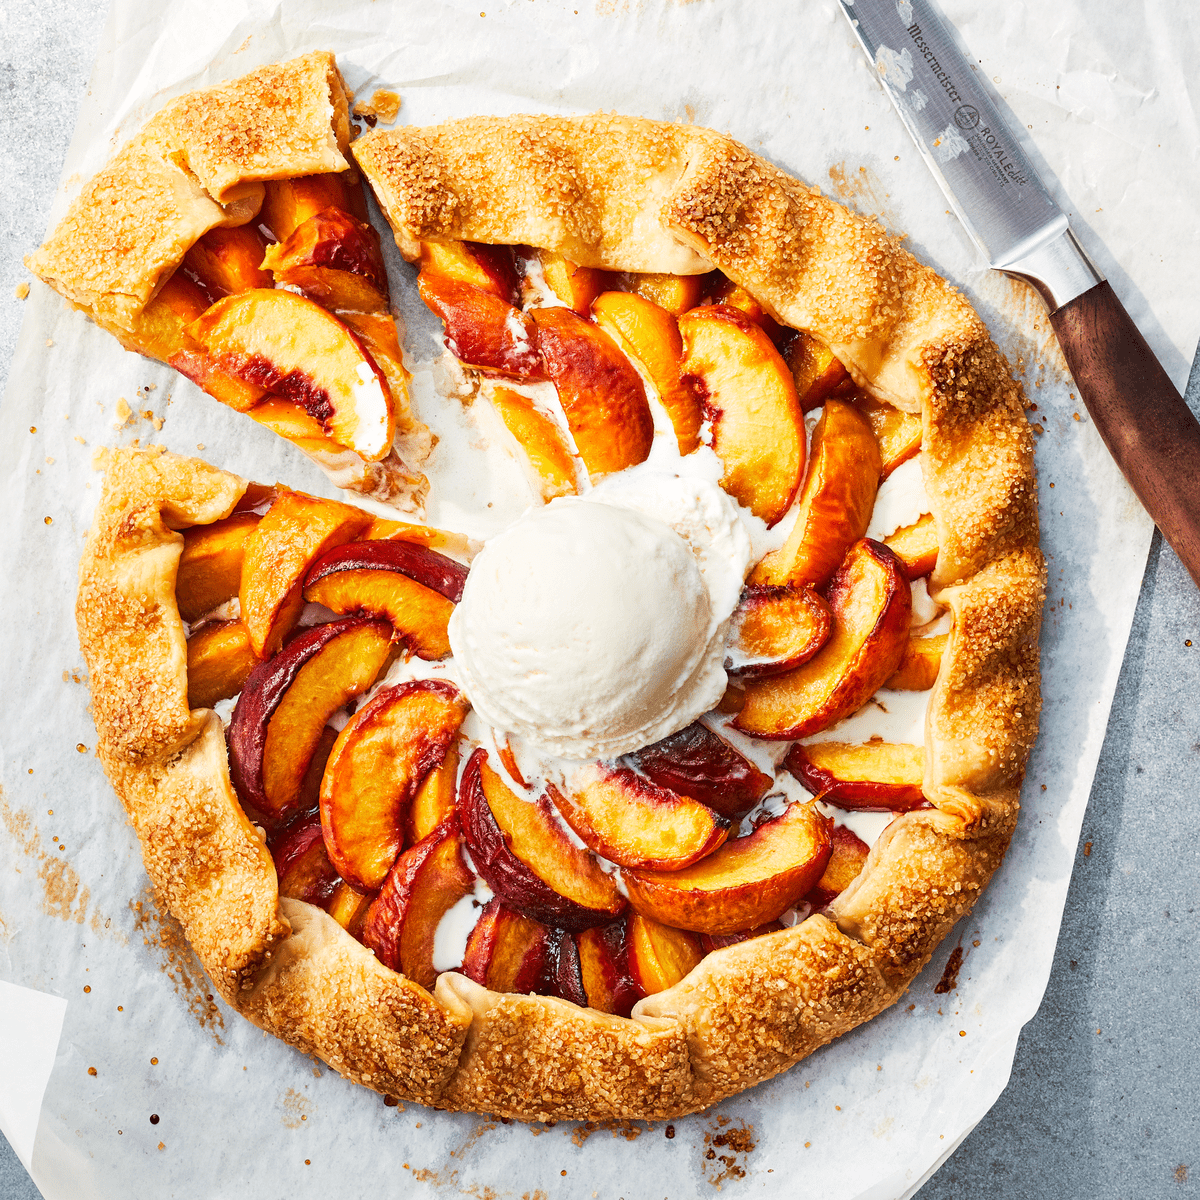 Gingered Peach Galette on parchment paper with a knife